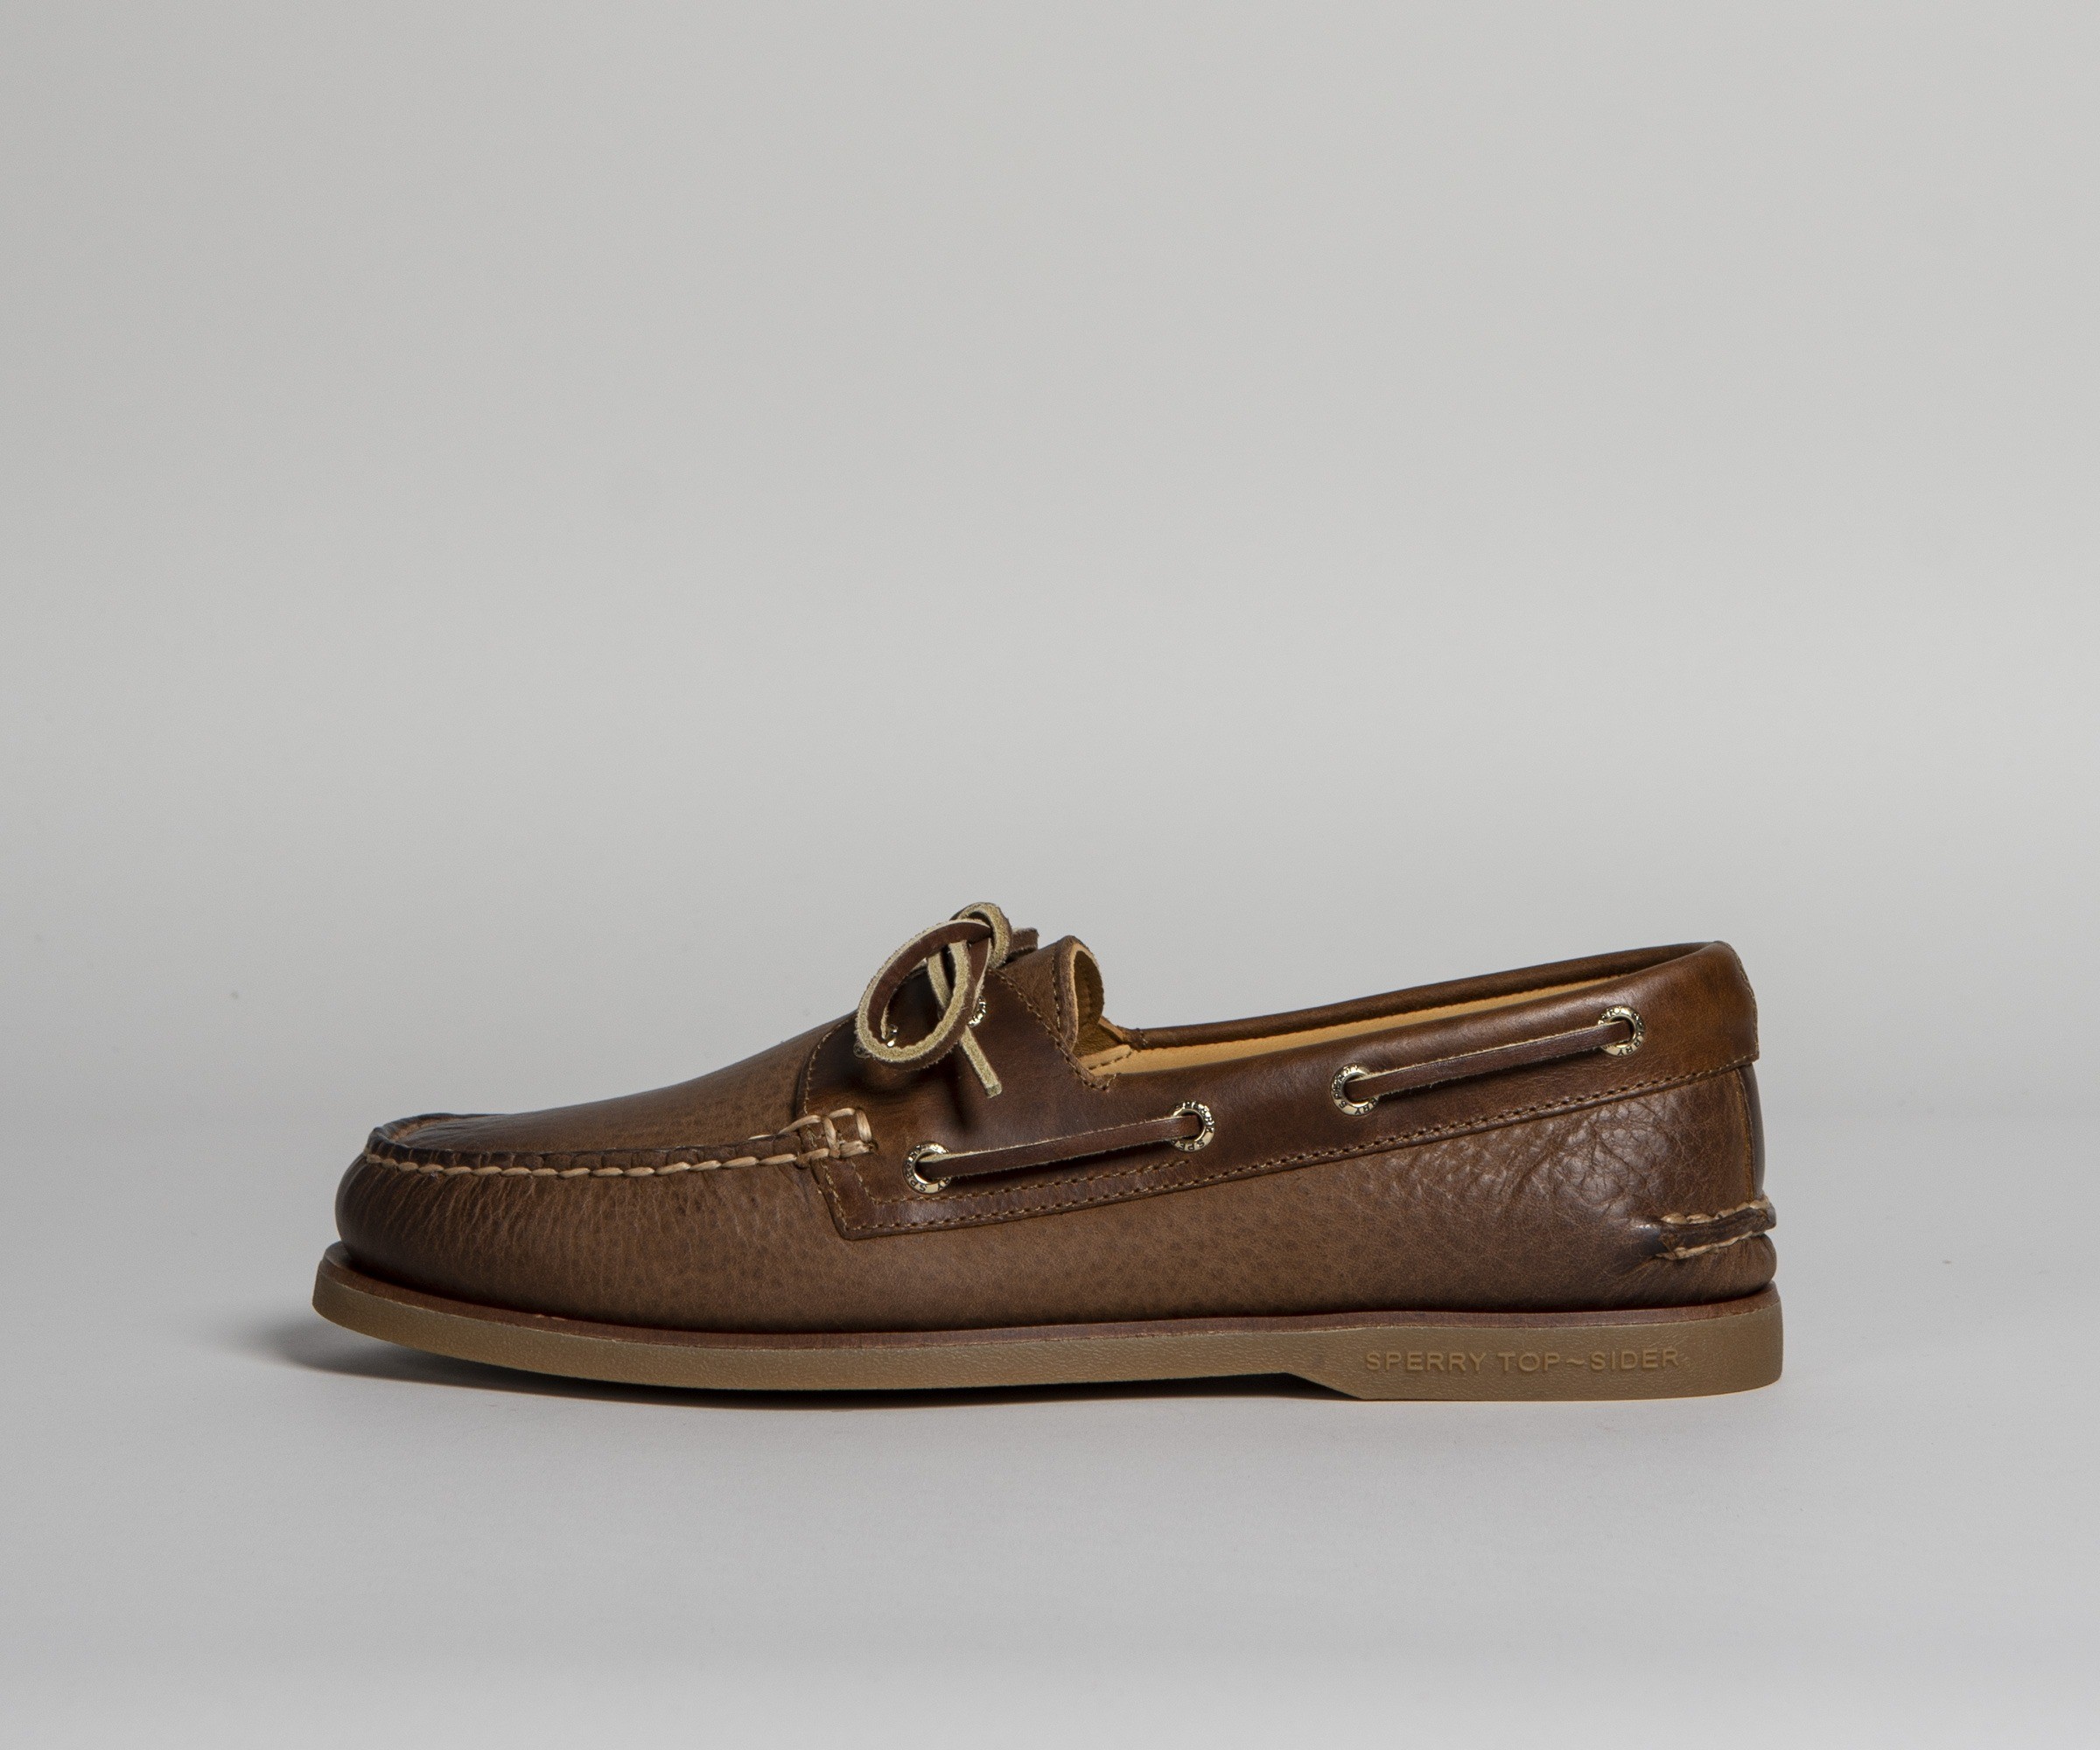 Sperry 'Top-Sider - 2-Eye Titan' Gold Cup Luxury Boat Shoes Tan